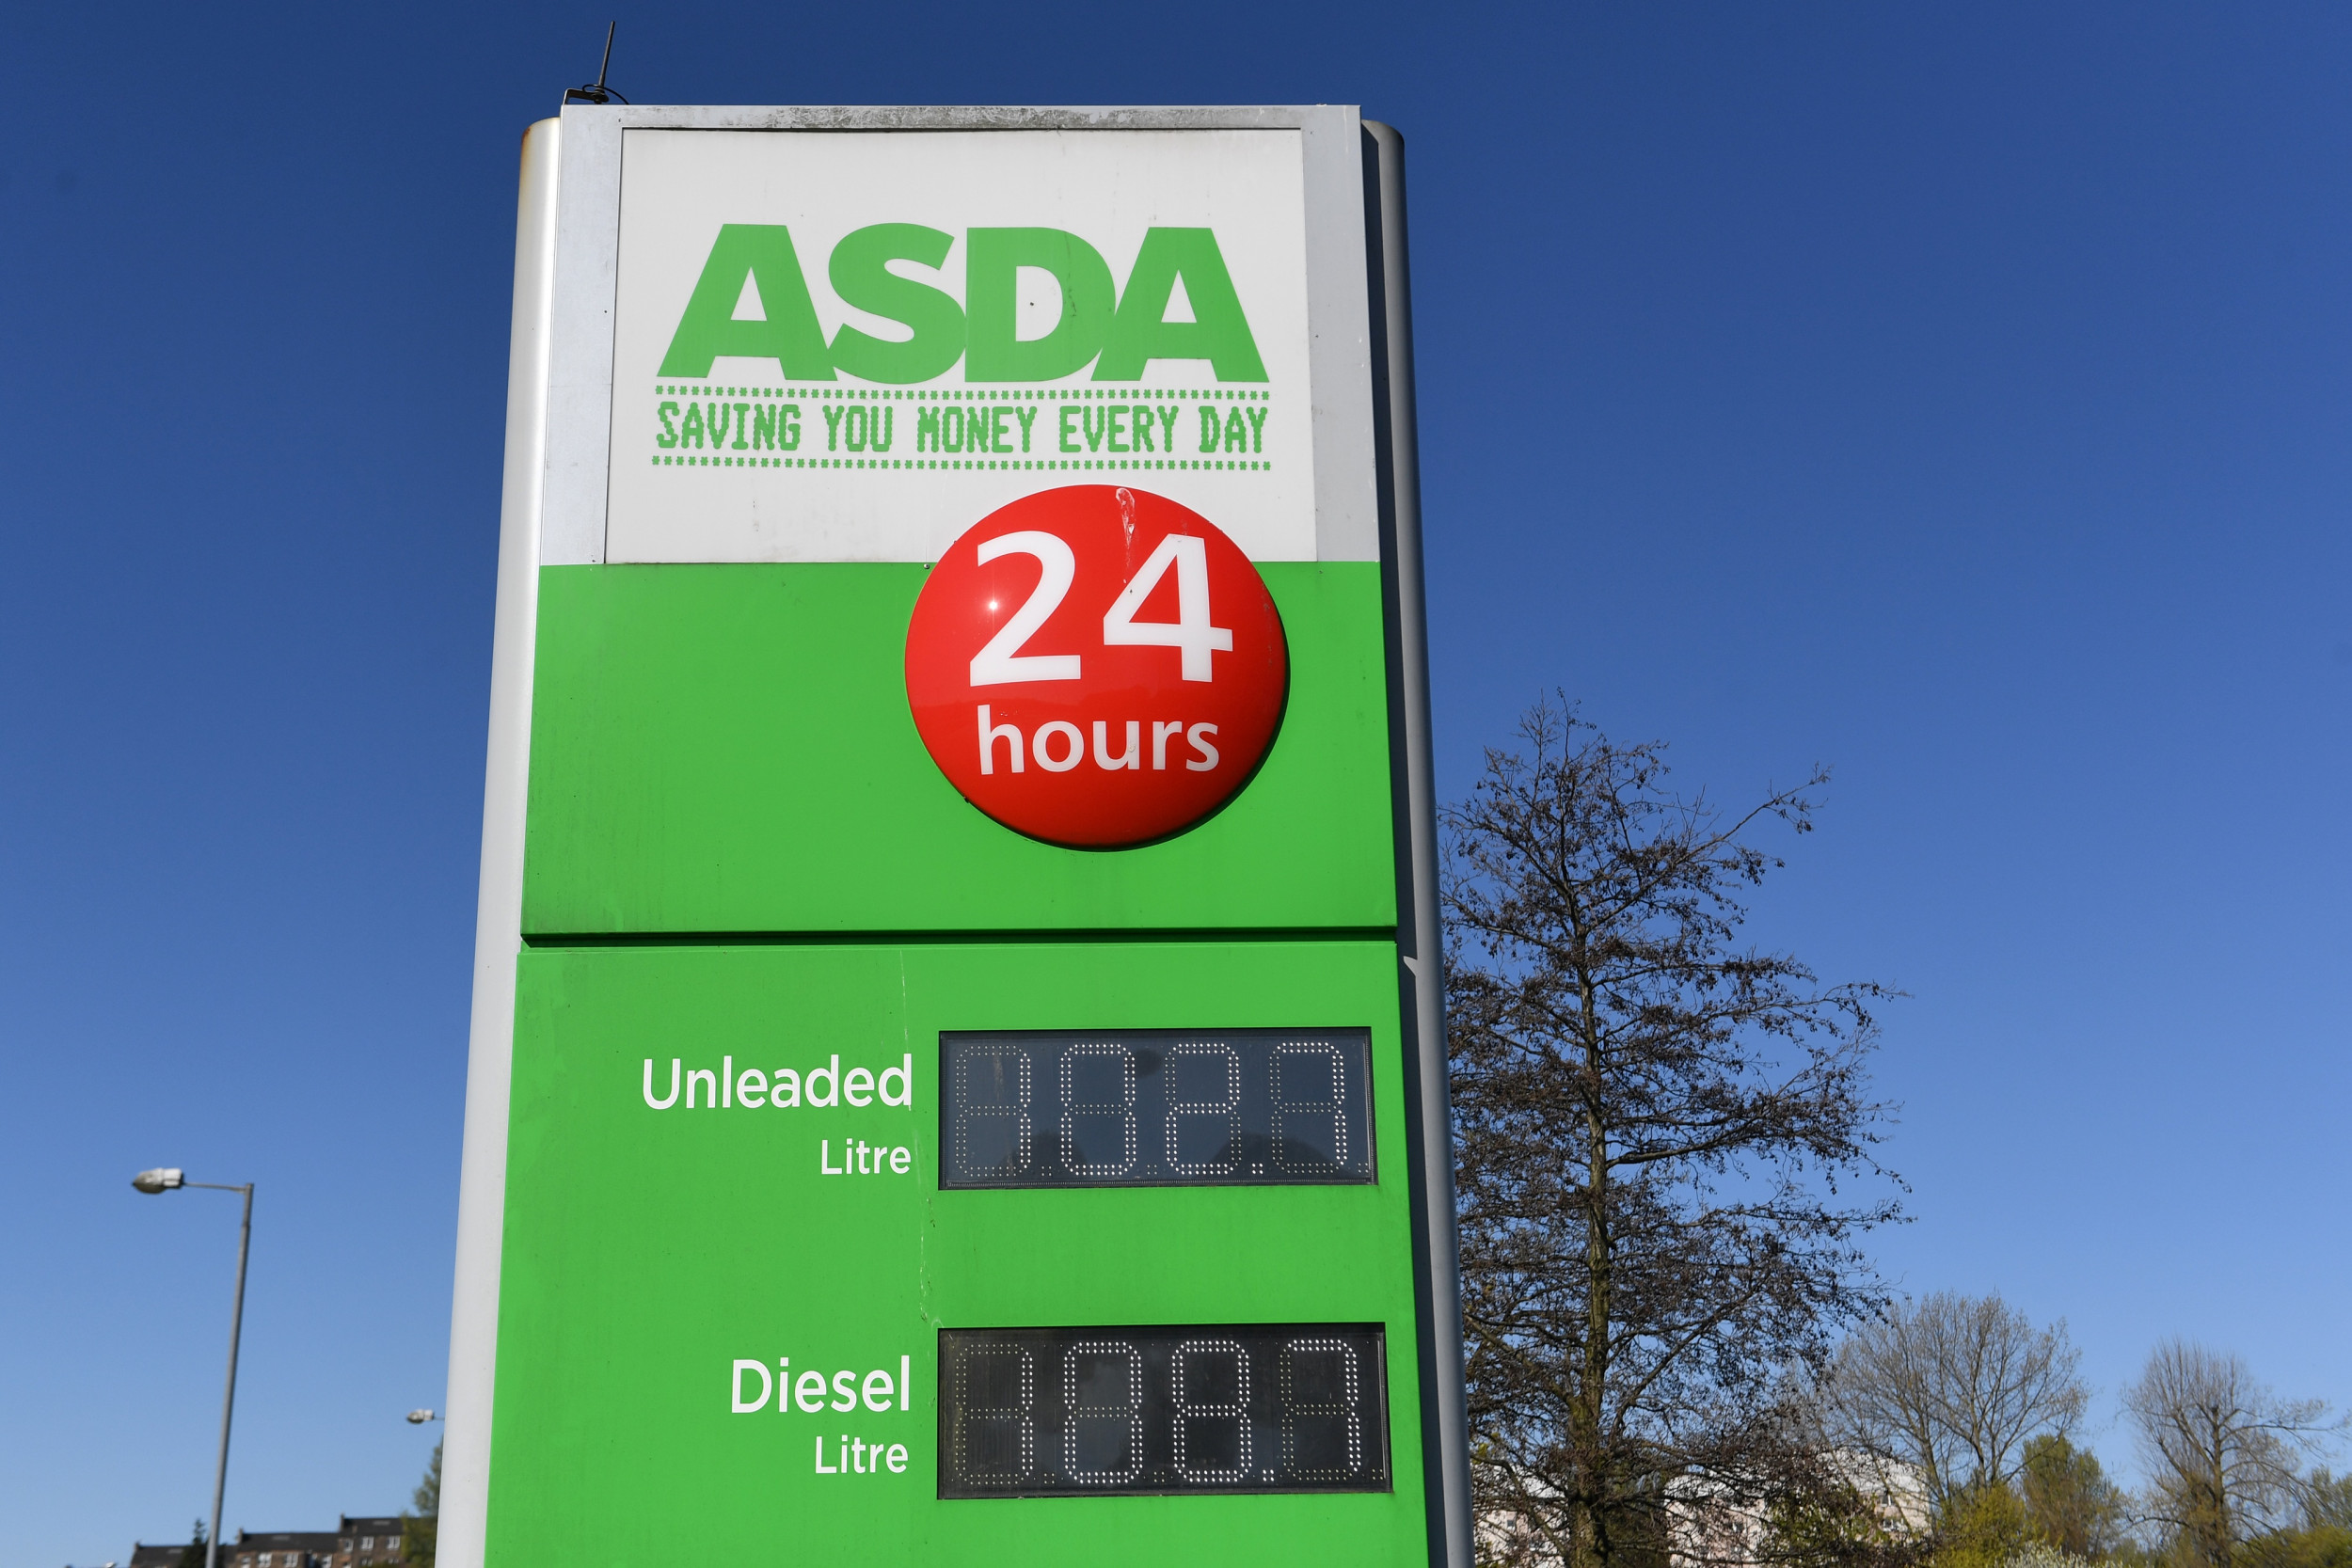 Dad blasts Asda in Folkestone after his son was allowed to buy £2